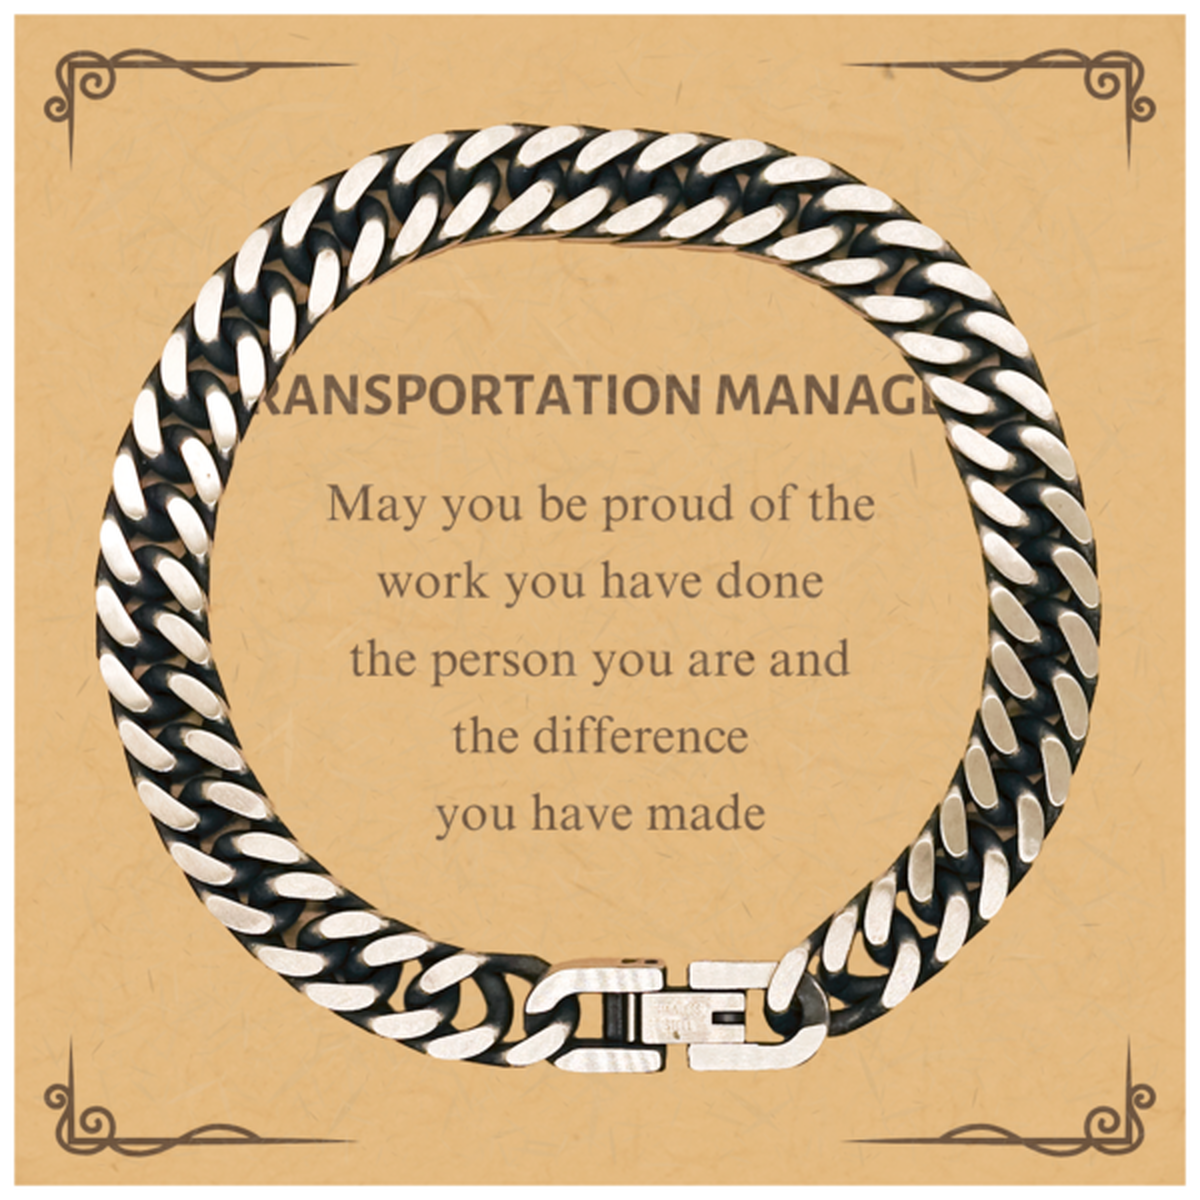 Transportation Manager May you be proud of the work you have done, Retirement Transportation Manager Cuban Link Chain Bracelet for Colleague Appreciation Gifts Amazing for Transportation Manager